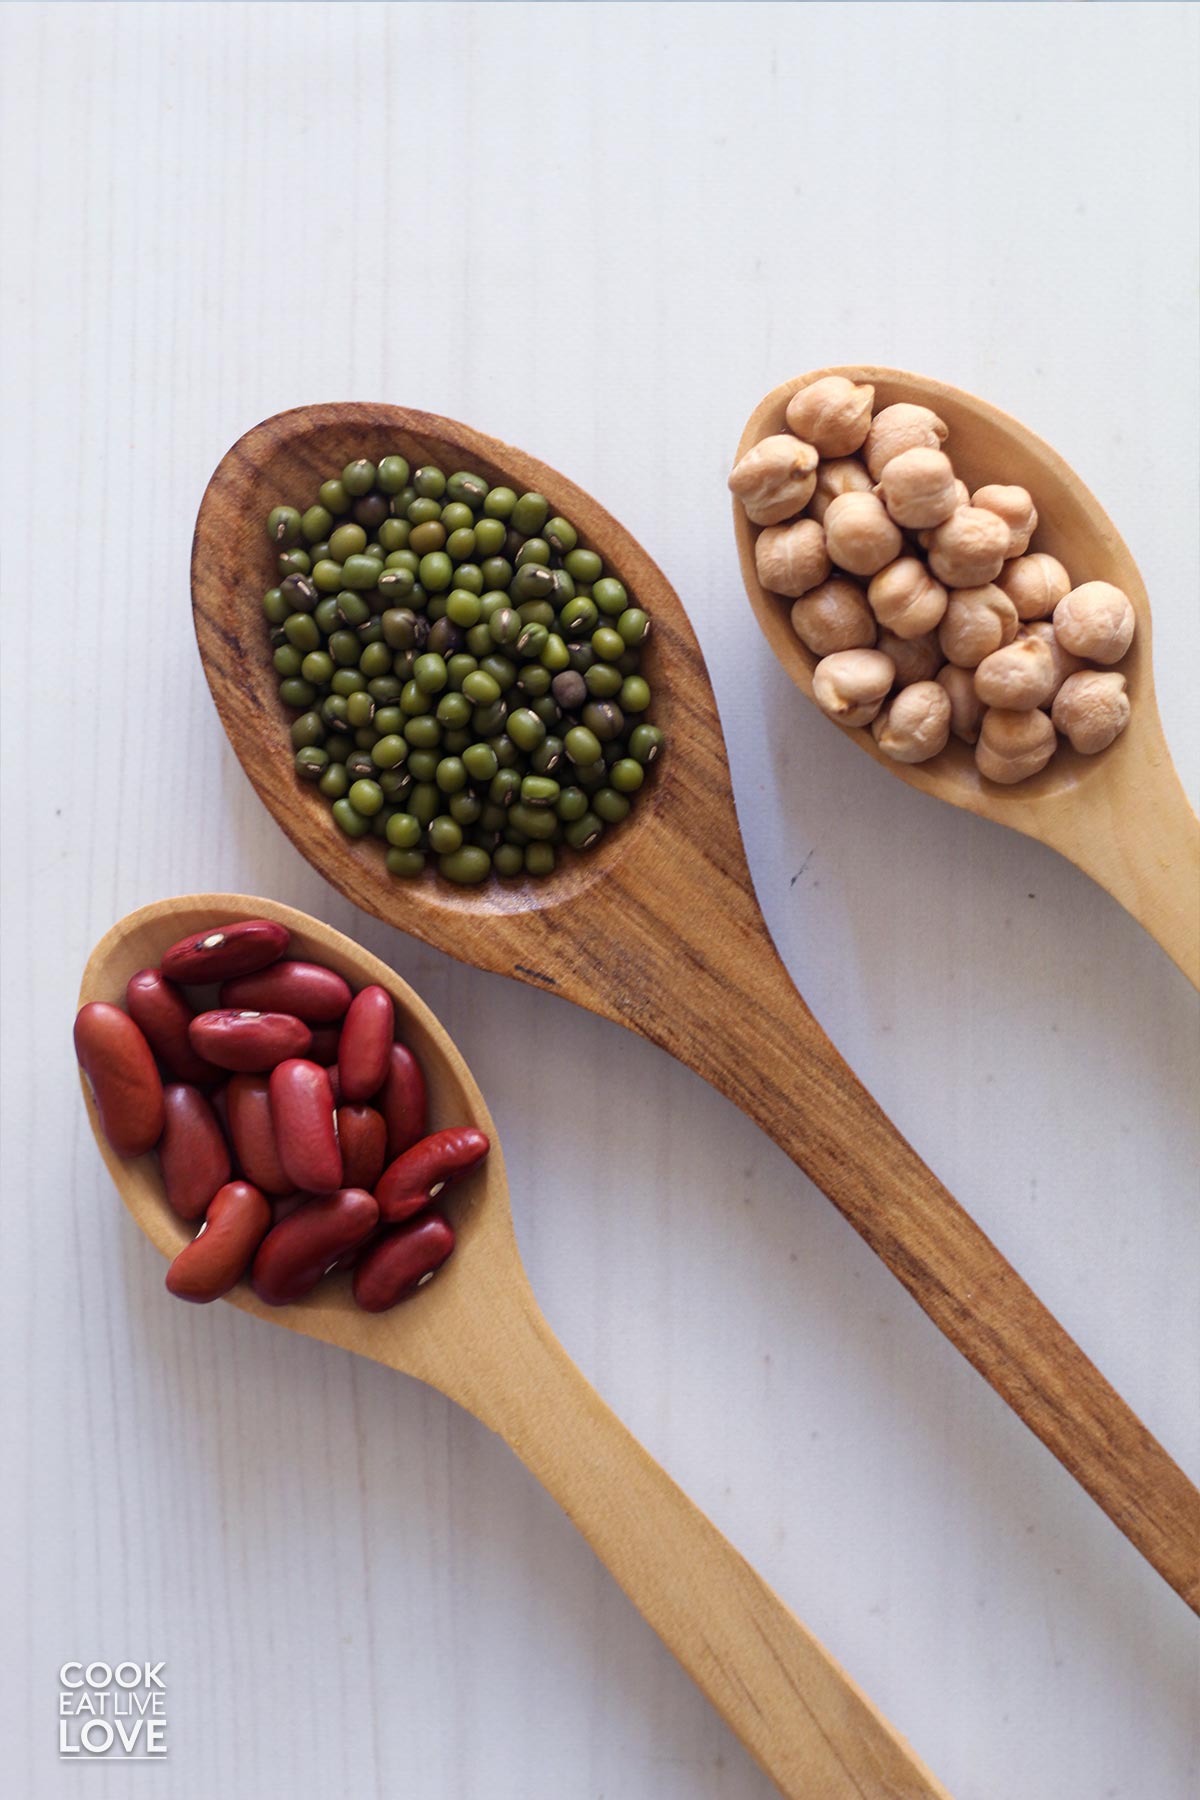 Three types of beans, red beans, mung beans and chickpeas in spoons from overhead.